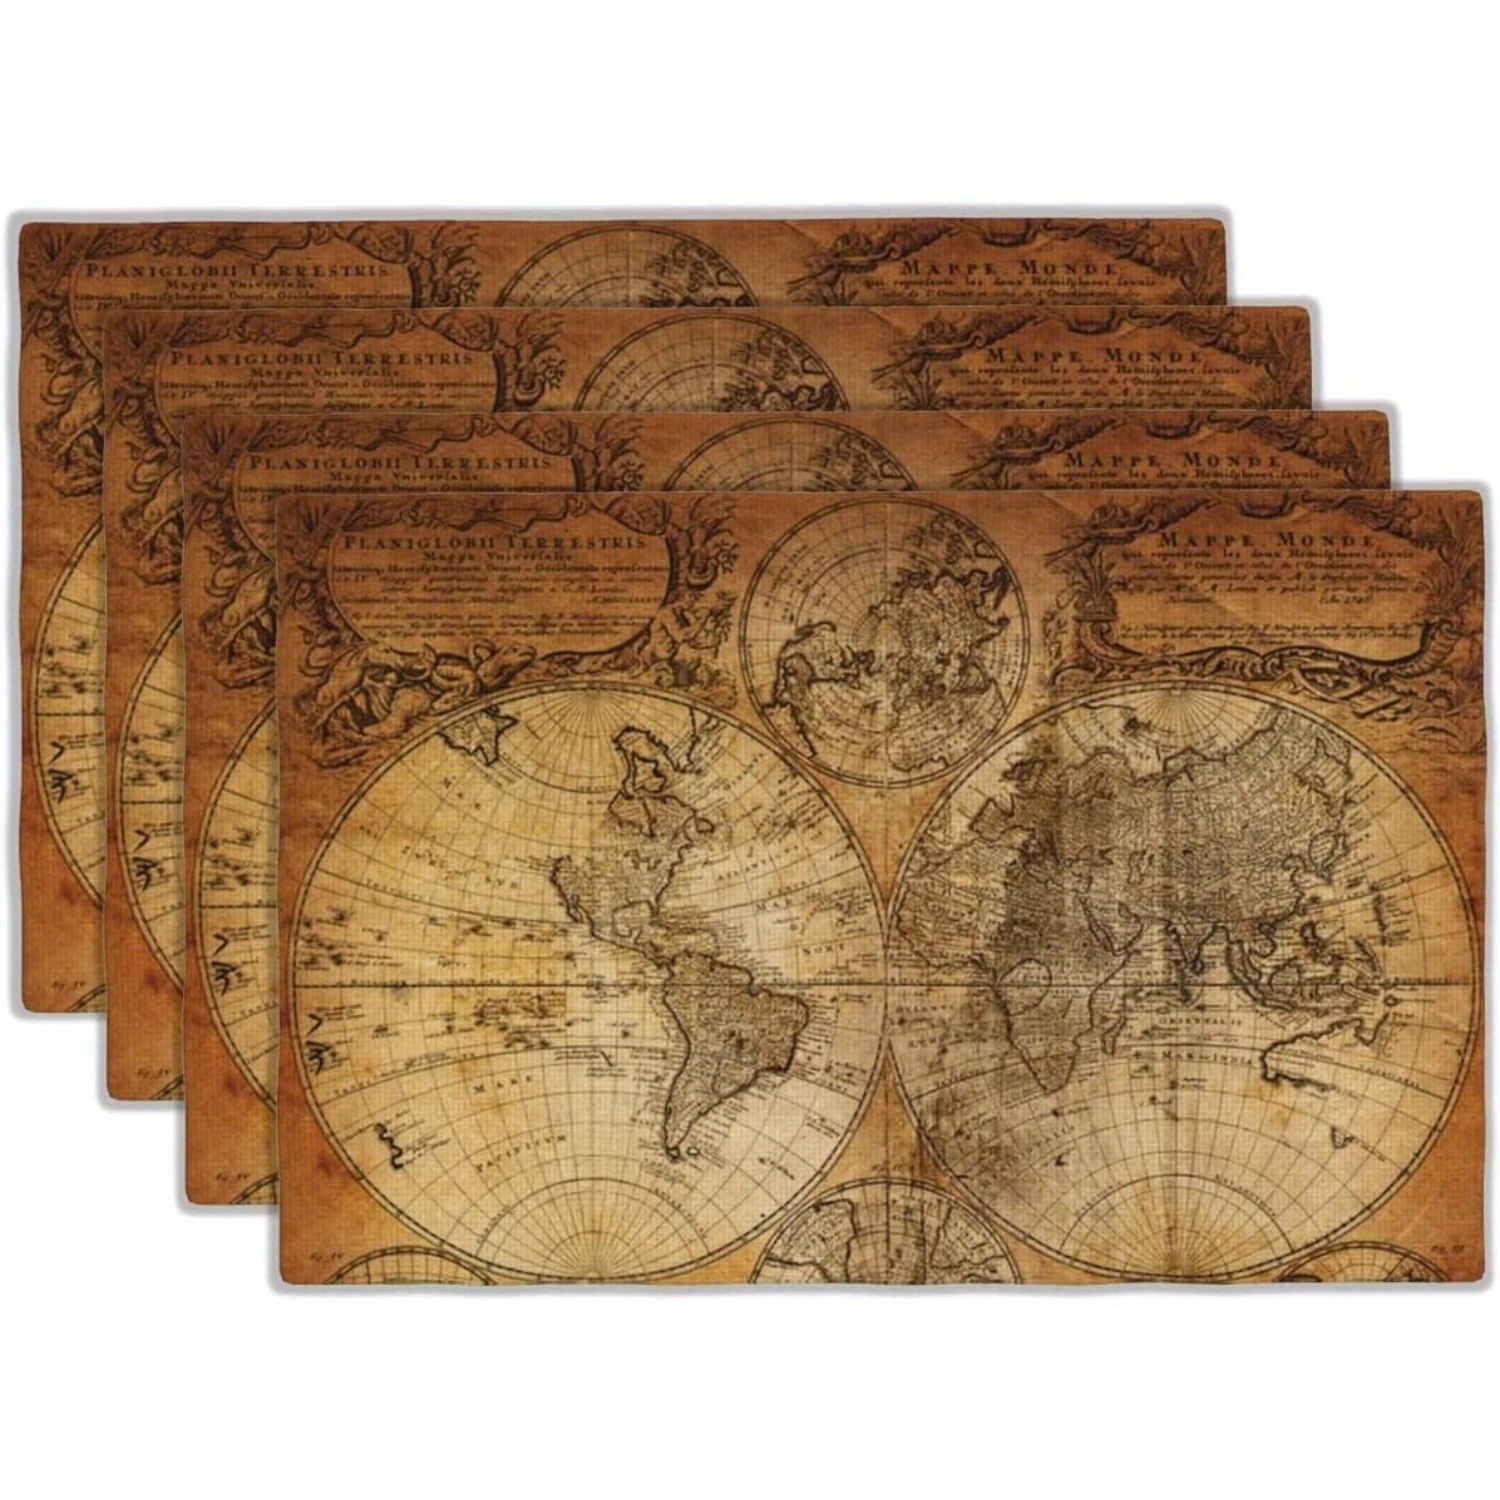 

4pcs, Table Pads, Vintage World Map Placemats Set, Old Paper Retro Style Decorative Dining Place Mats, Nostalgic Historical Art Printed Table Mat, Heat-resistant Rectangle Table Decor